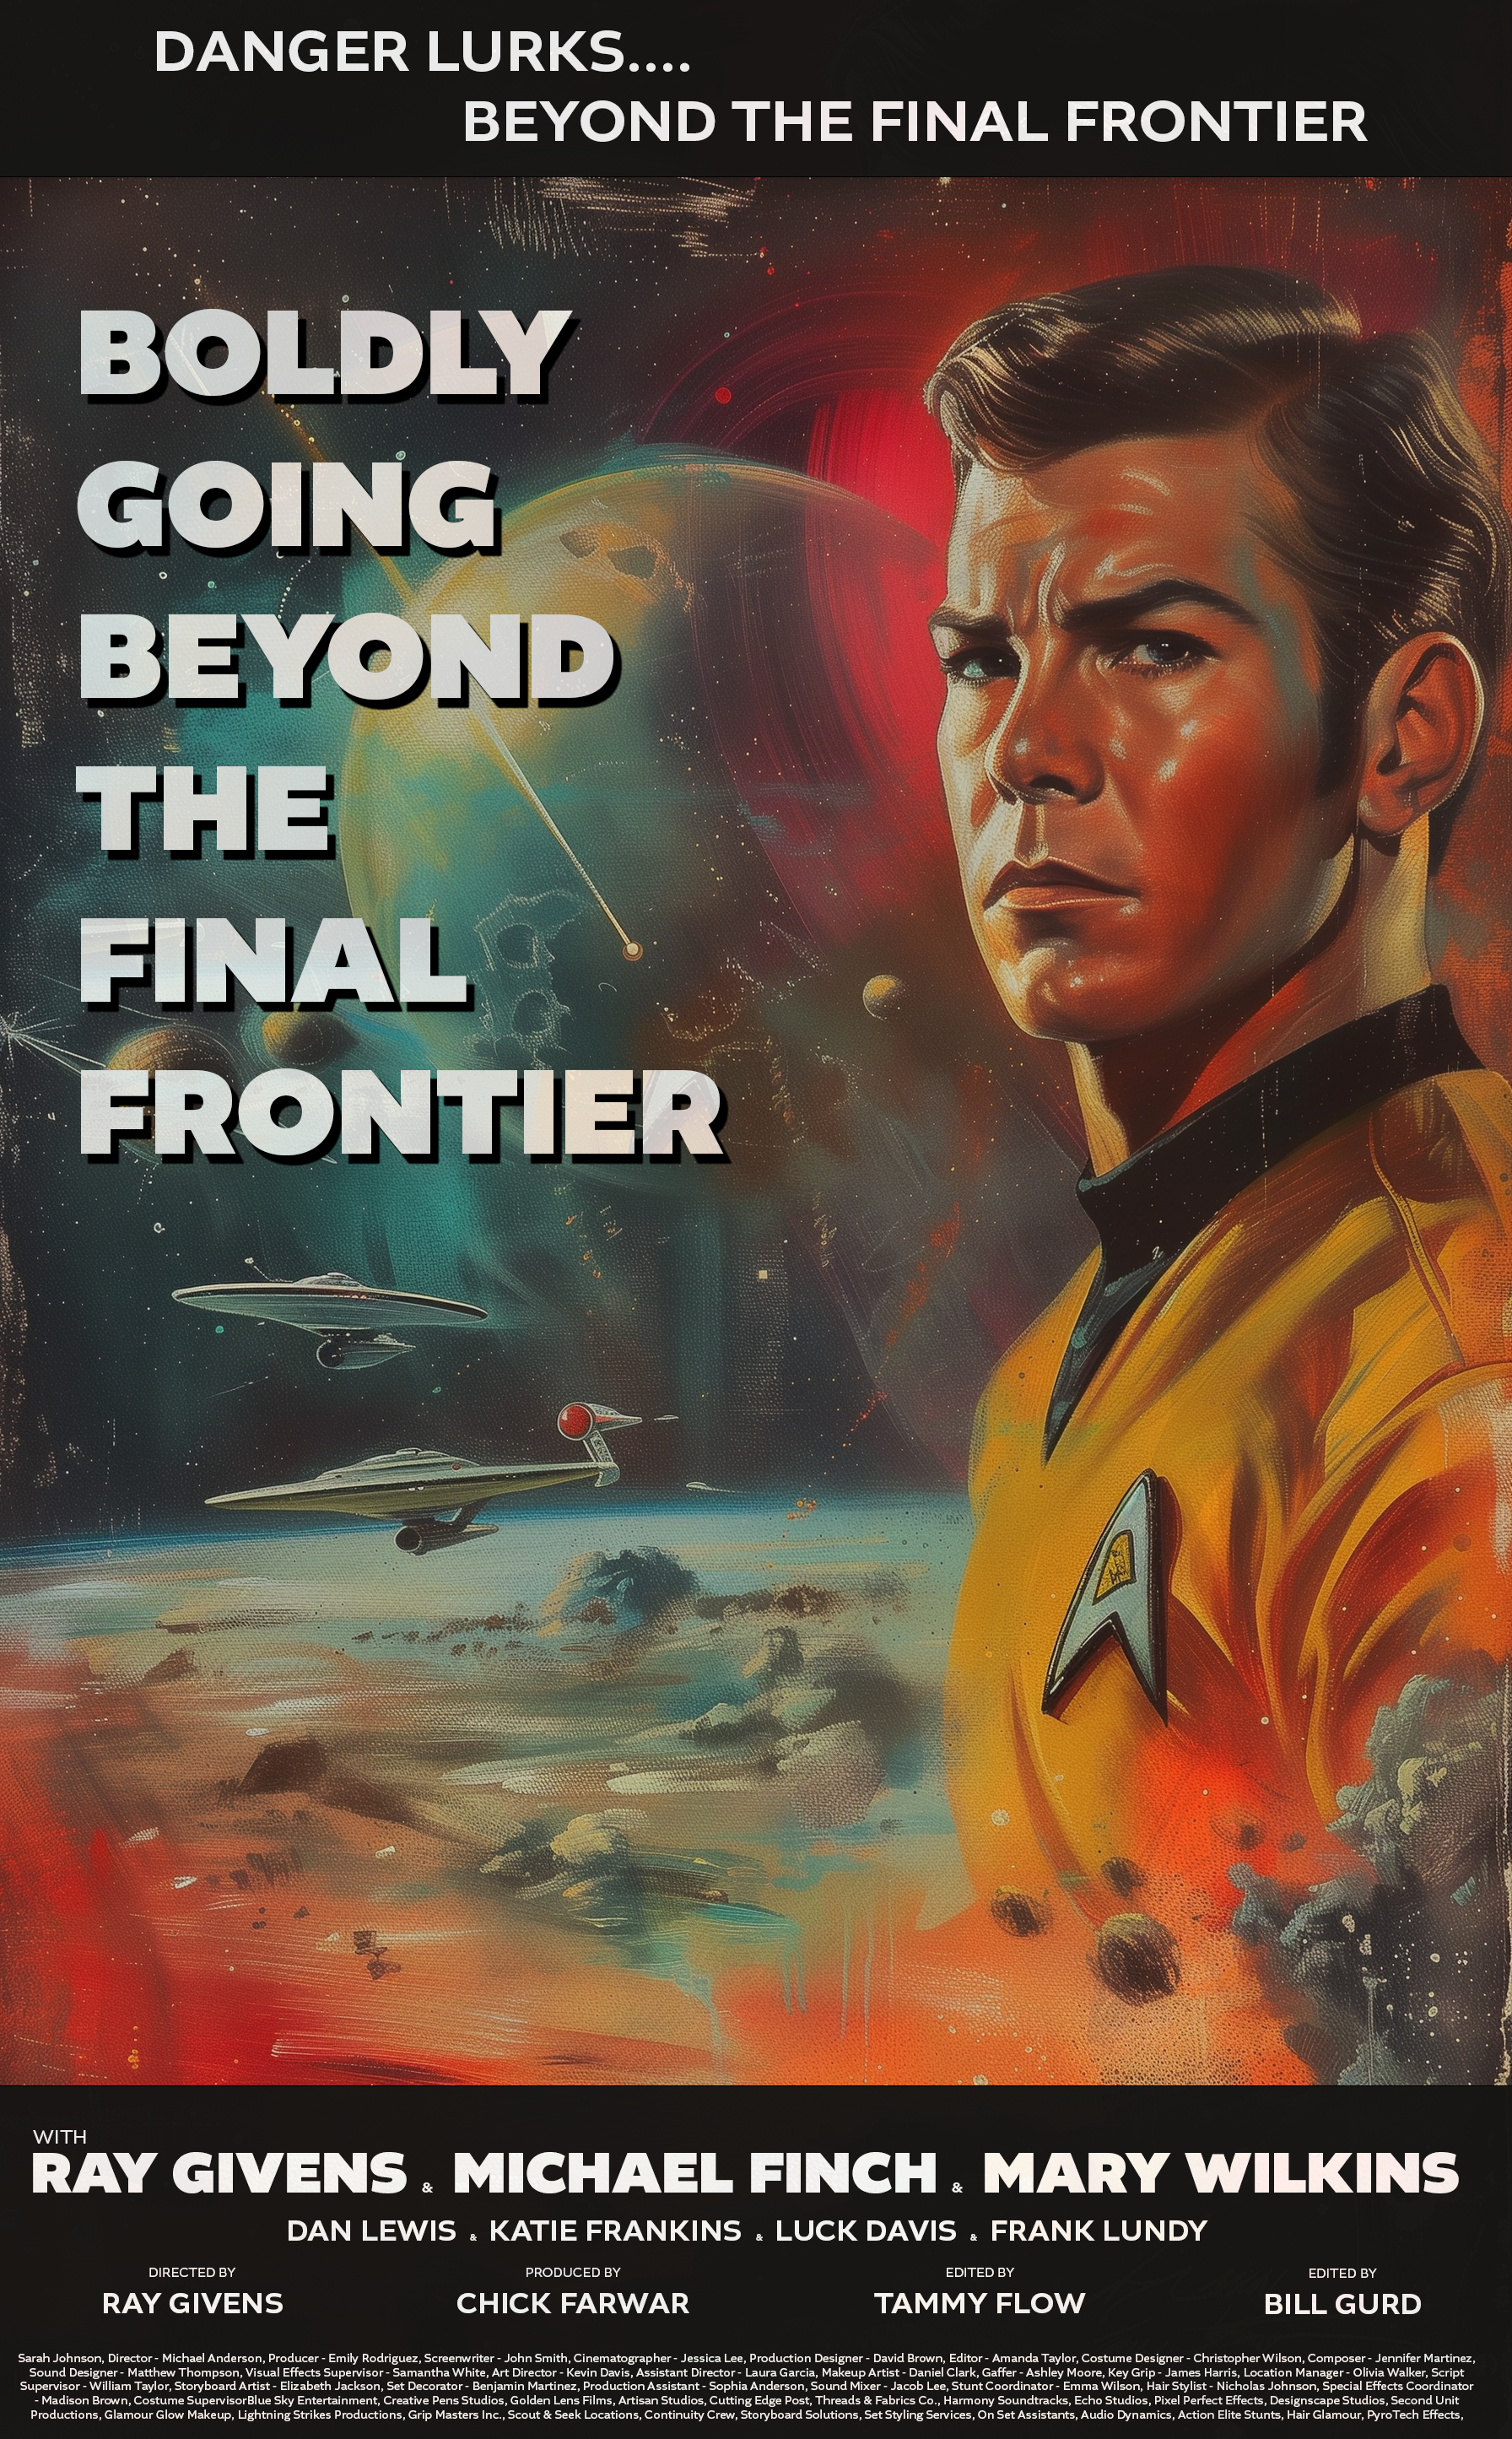 Name:  Beyond the Final Frontier.png
Views: 144
Size:  8.19 MB